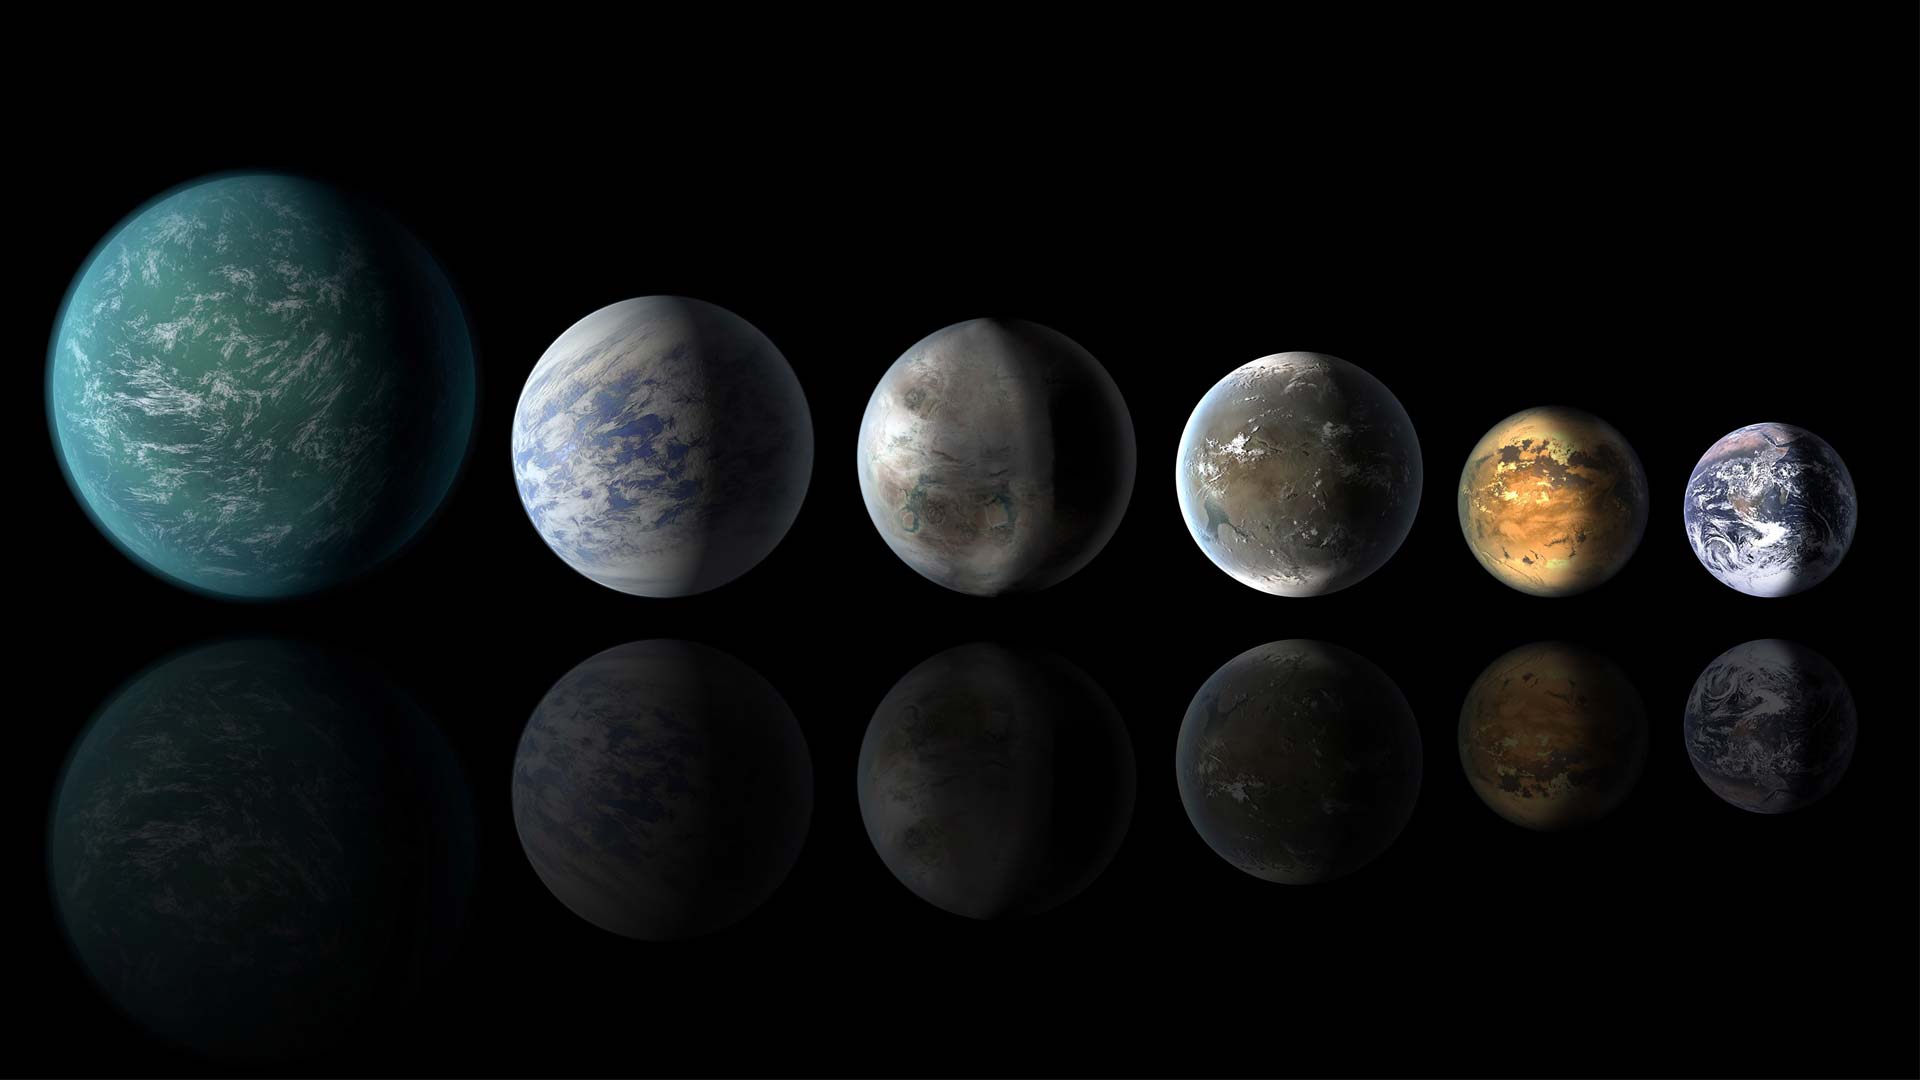 An artist’s conception shows habitable-zone exoplanets with similarities to Earth: from left, Kepler-22b, Kepler-69c, Kepler-452b, Kepler-62f and Kepler-186f. Last in line is Earth itself.